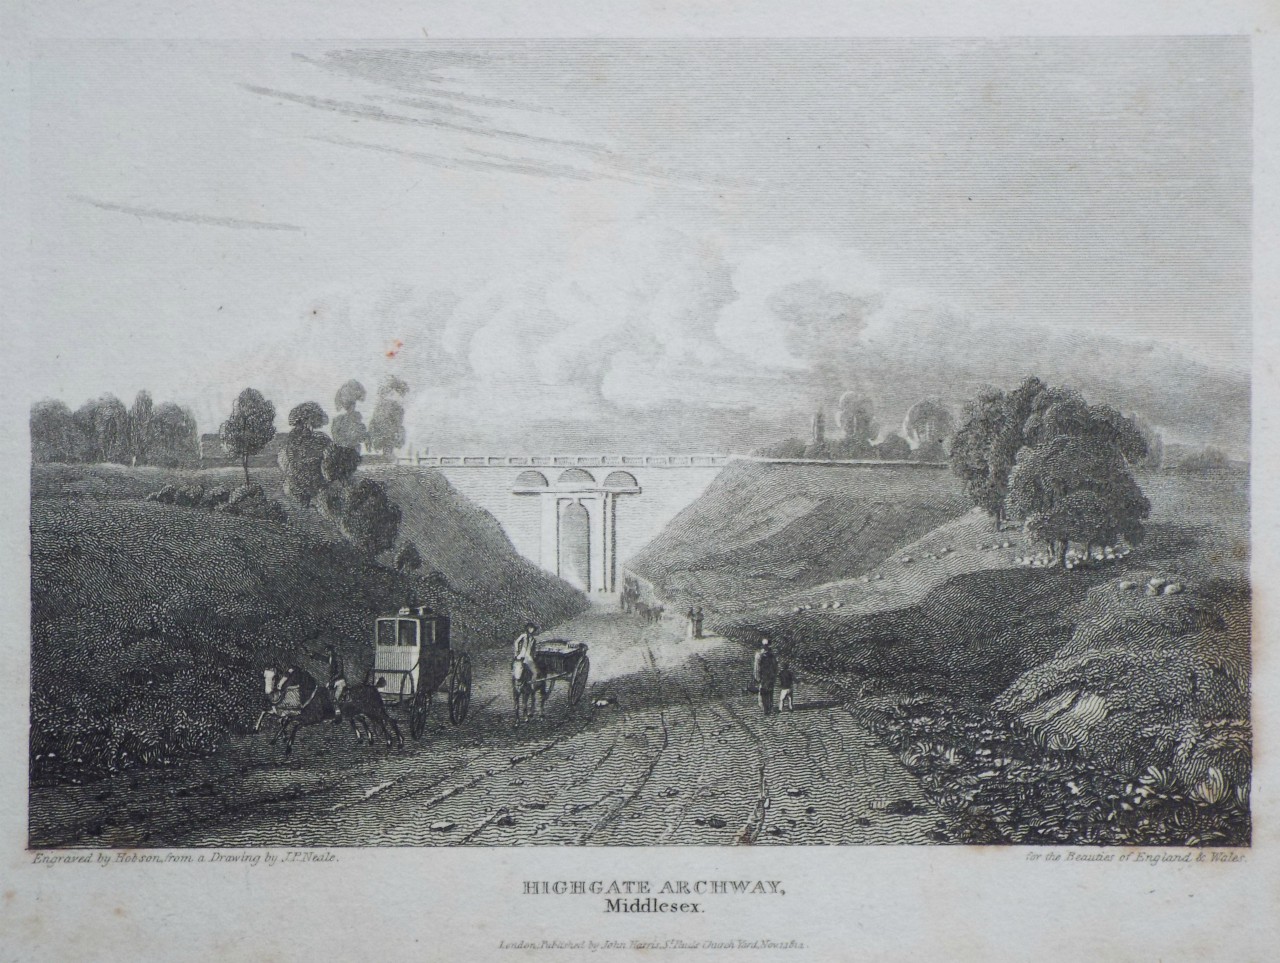 Print - Highgate Archway, Middlesex. - 